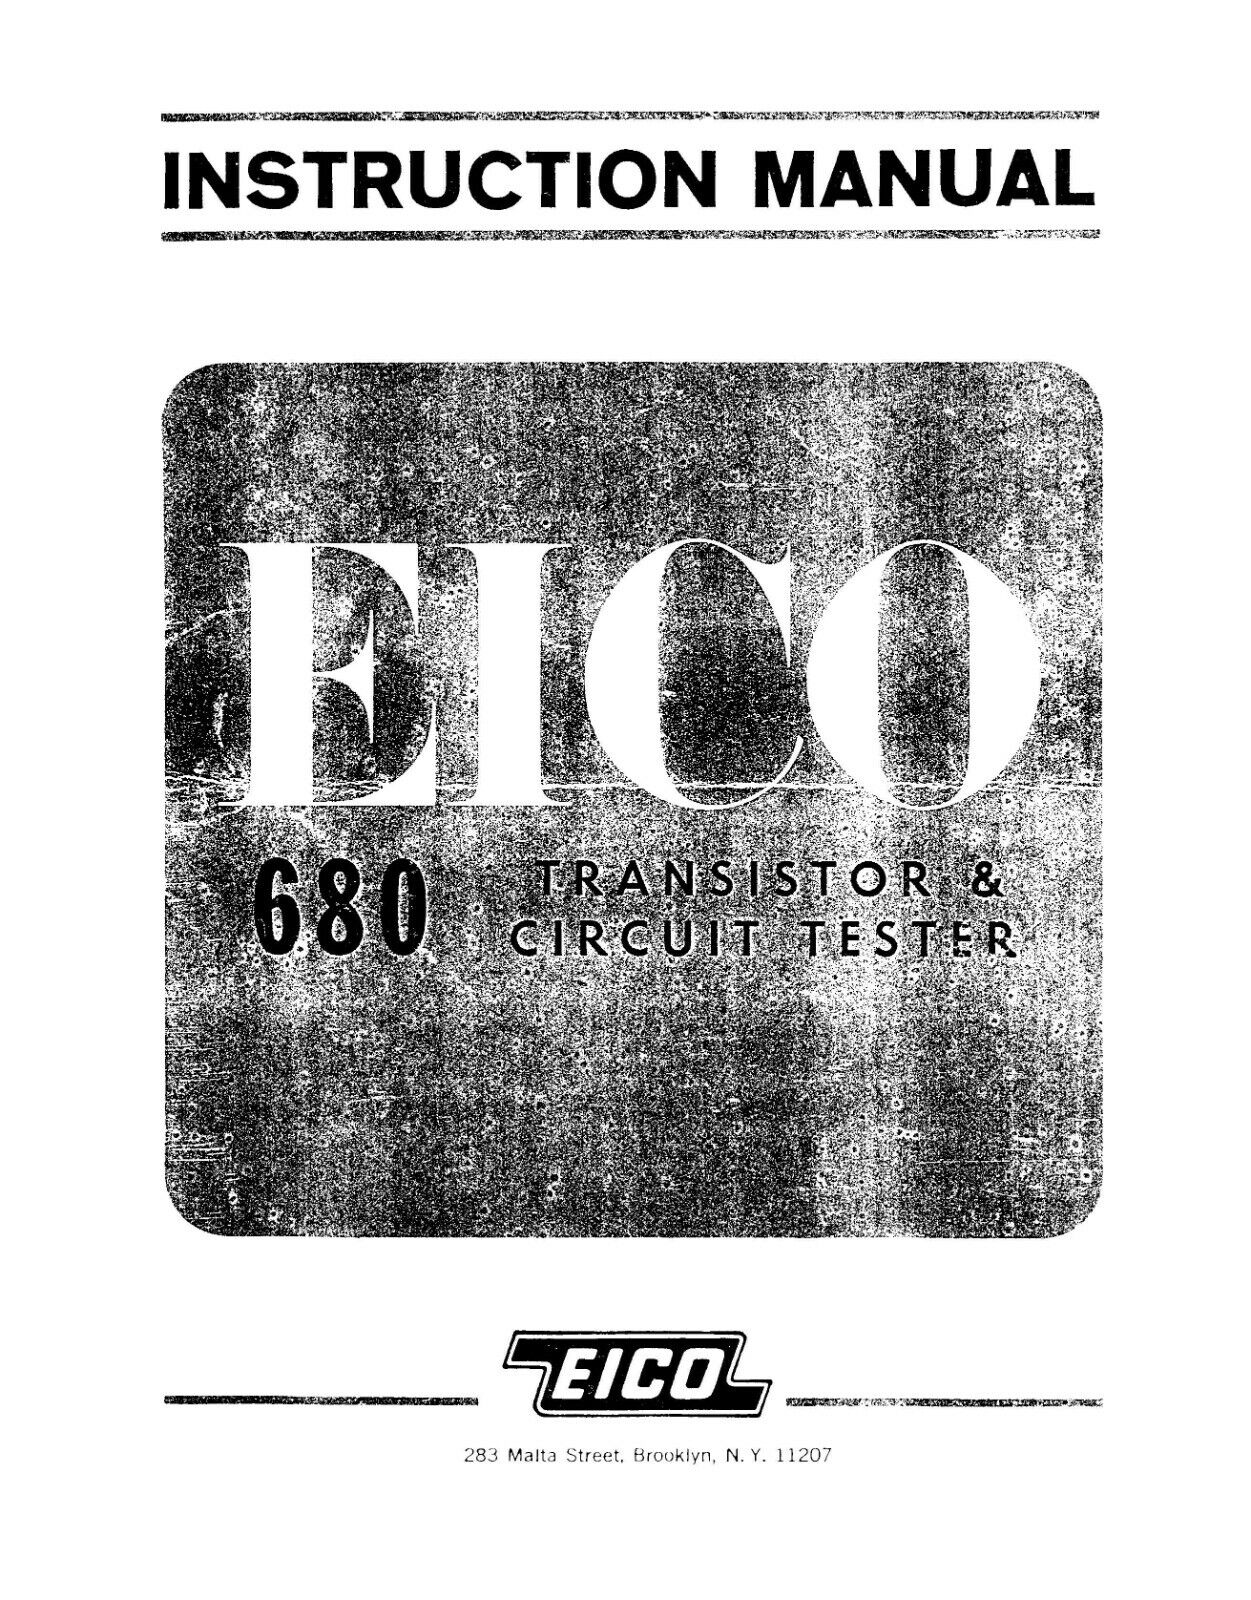 Transistor and Circuit Tester Instruction Manual Fits Eico 680